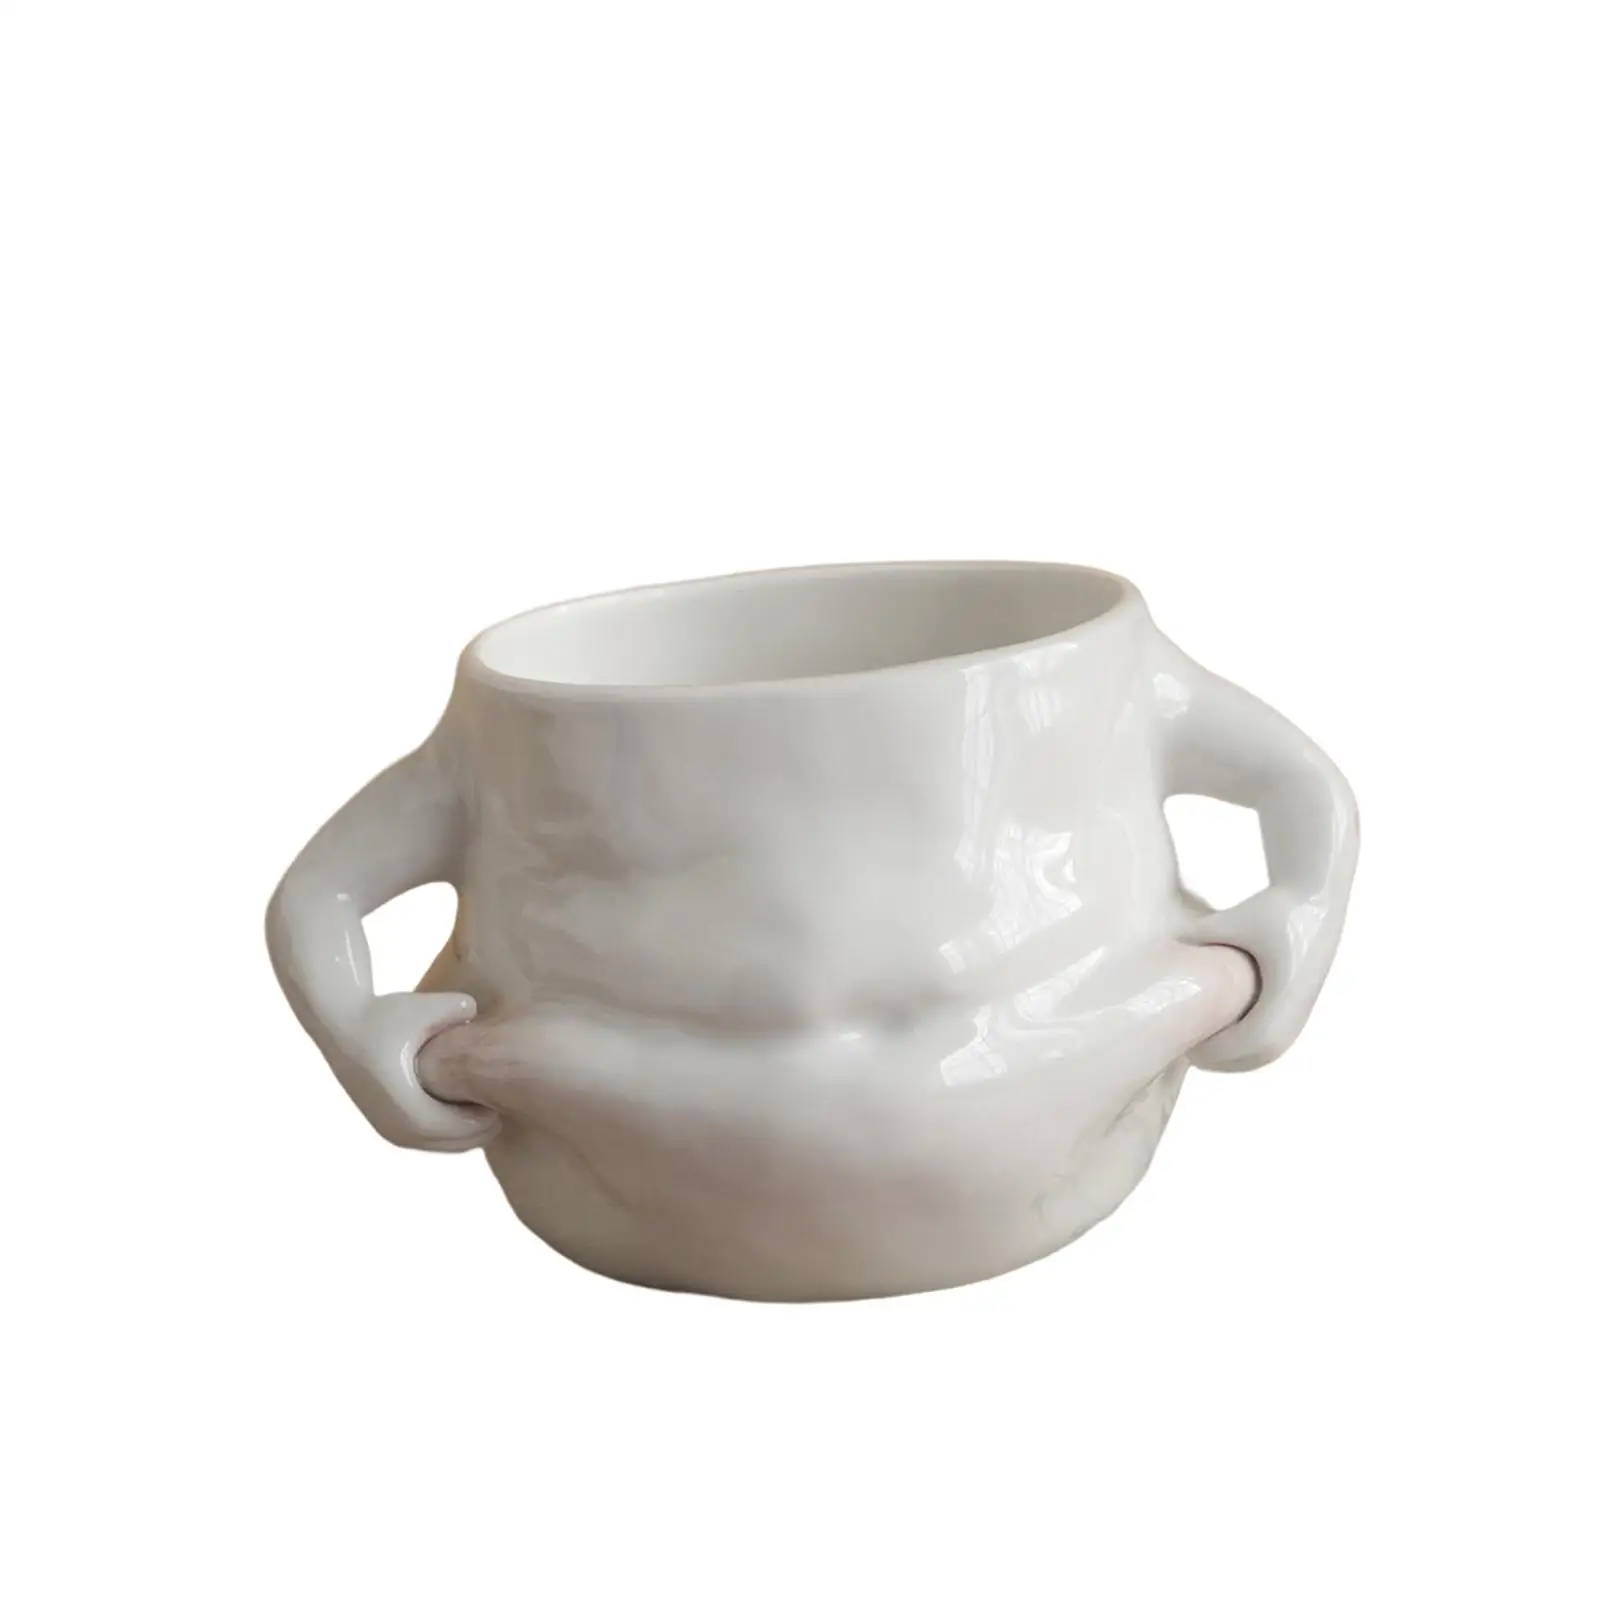 Creative Ceramic Coffee mug Cup Housewarming Gift Novelty white Pinch Belly Funny for pub kitchen